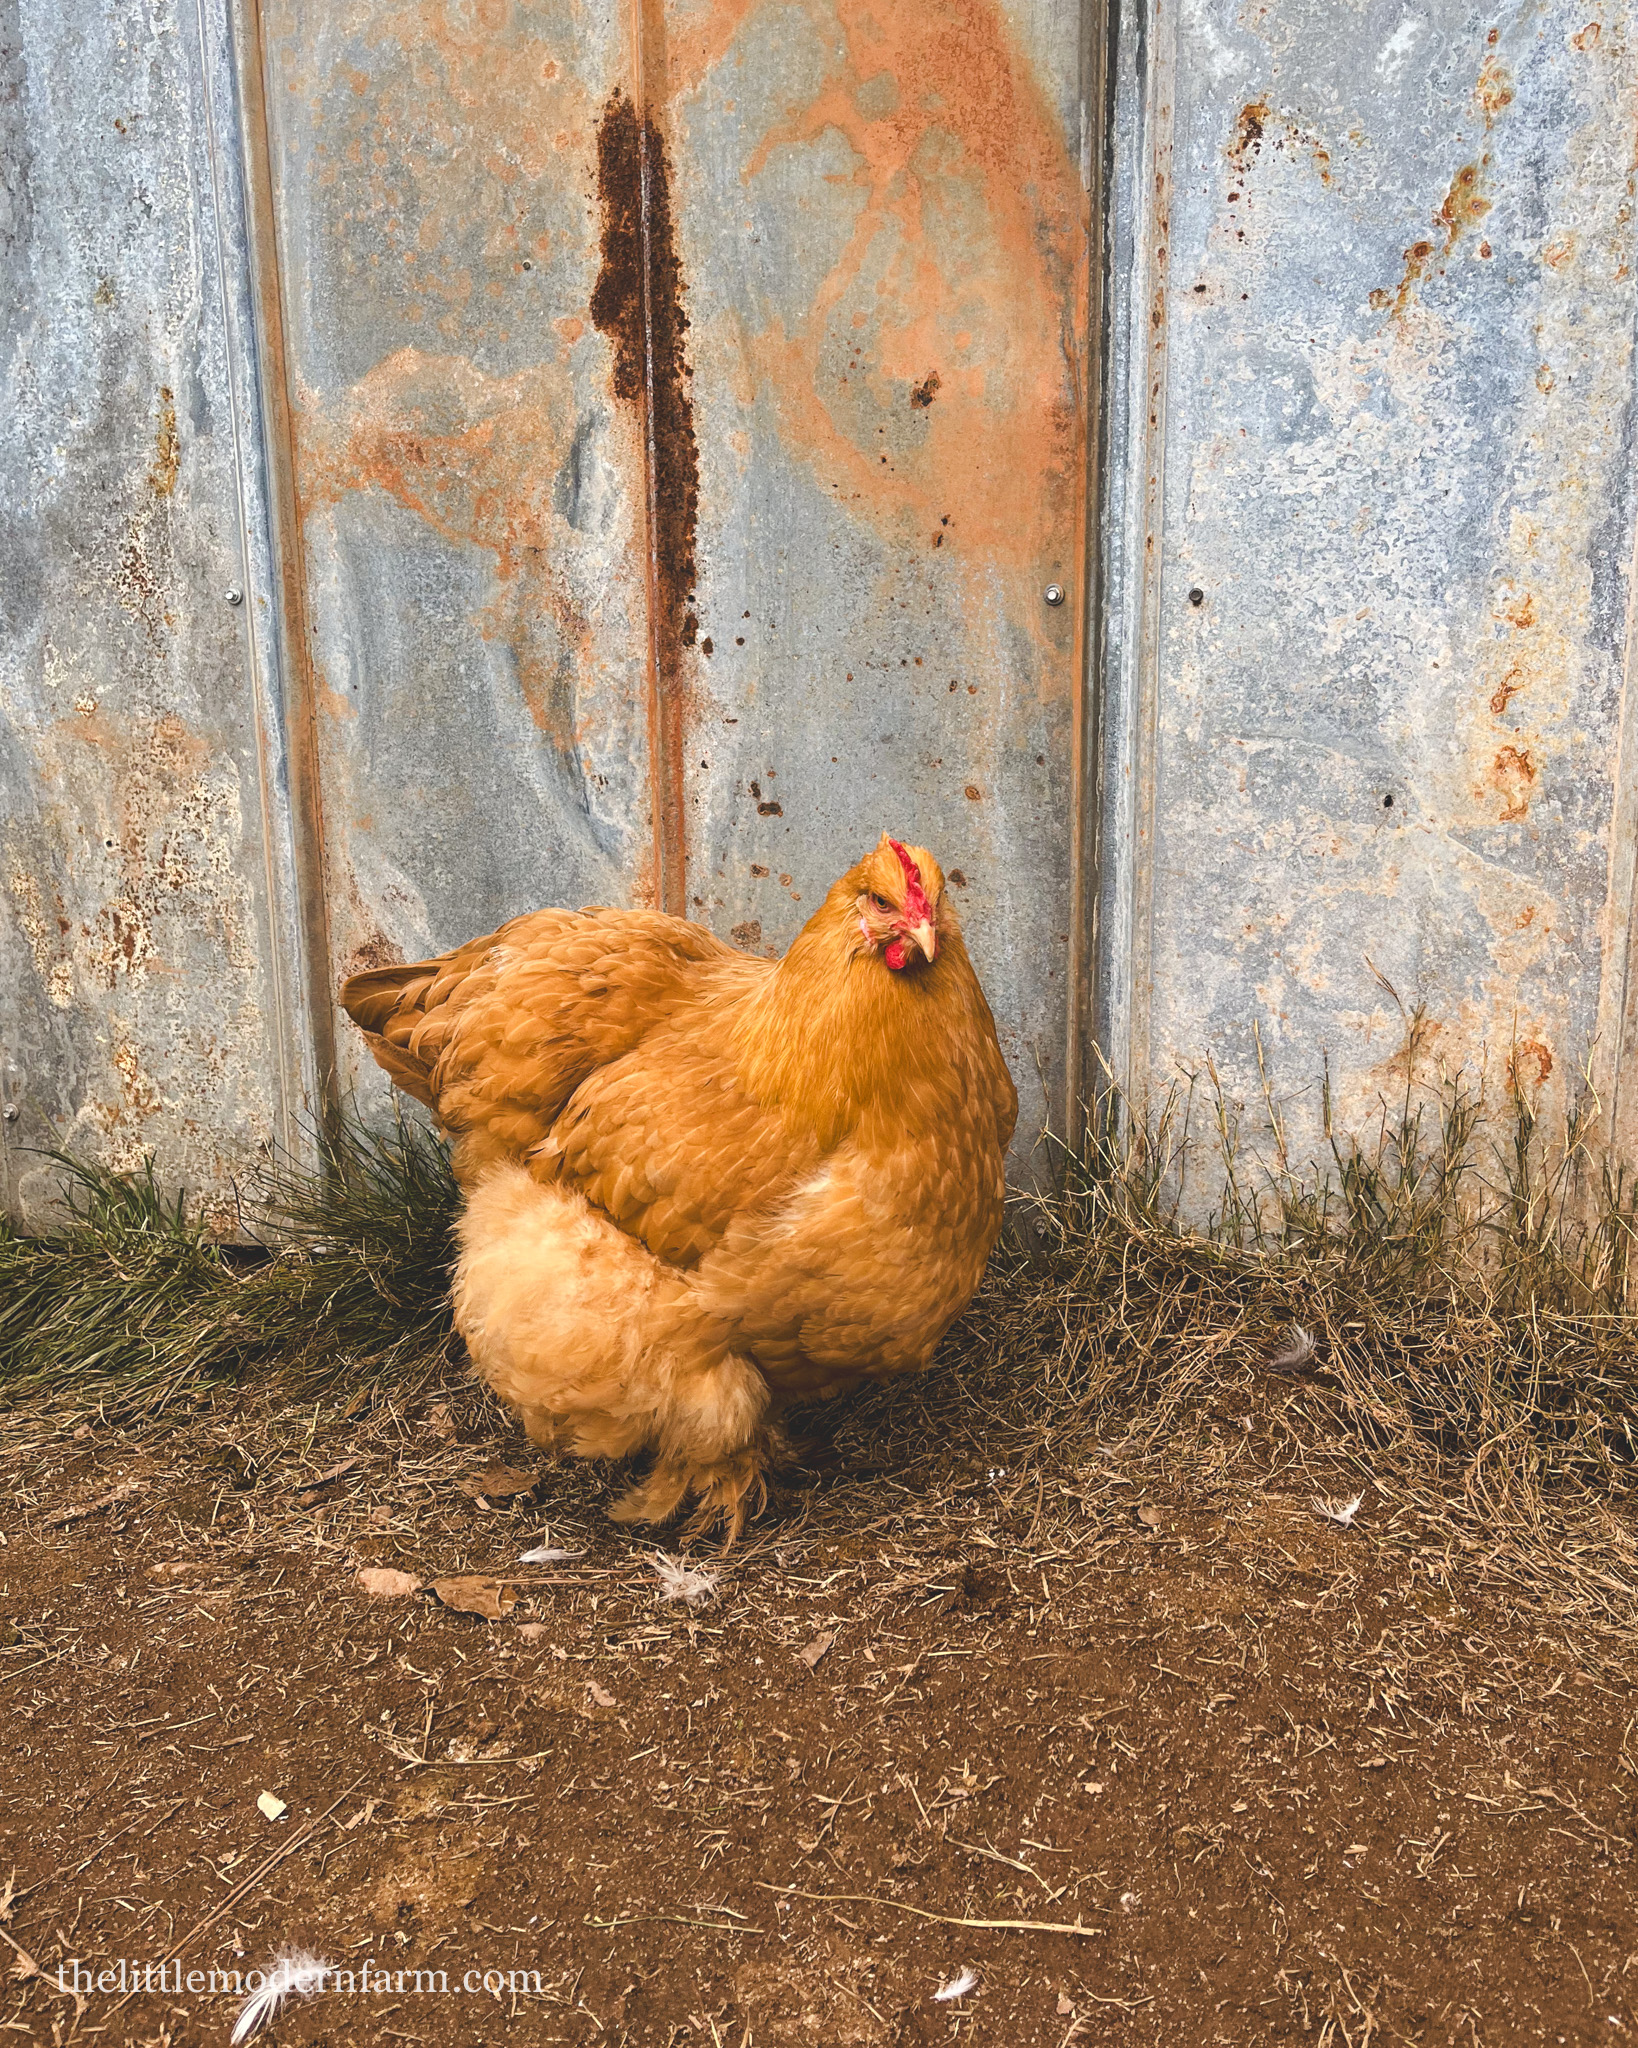 The Brahma Chicken - Raising a Large Breed - Backyard Poultry